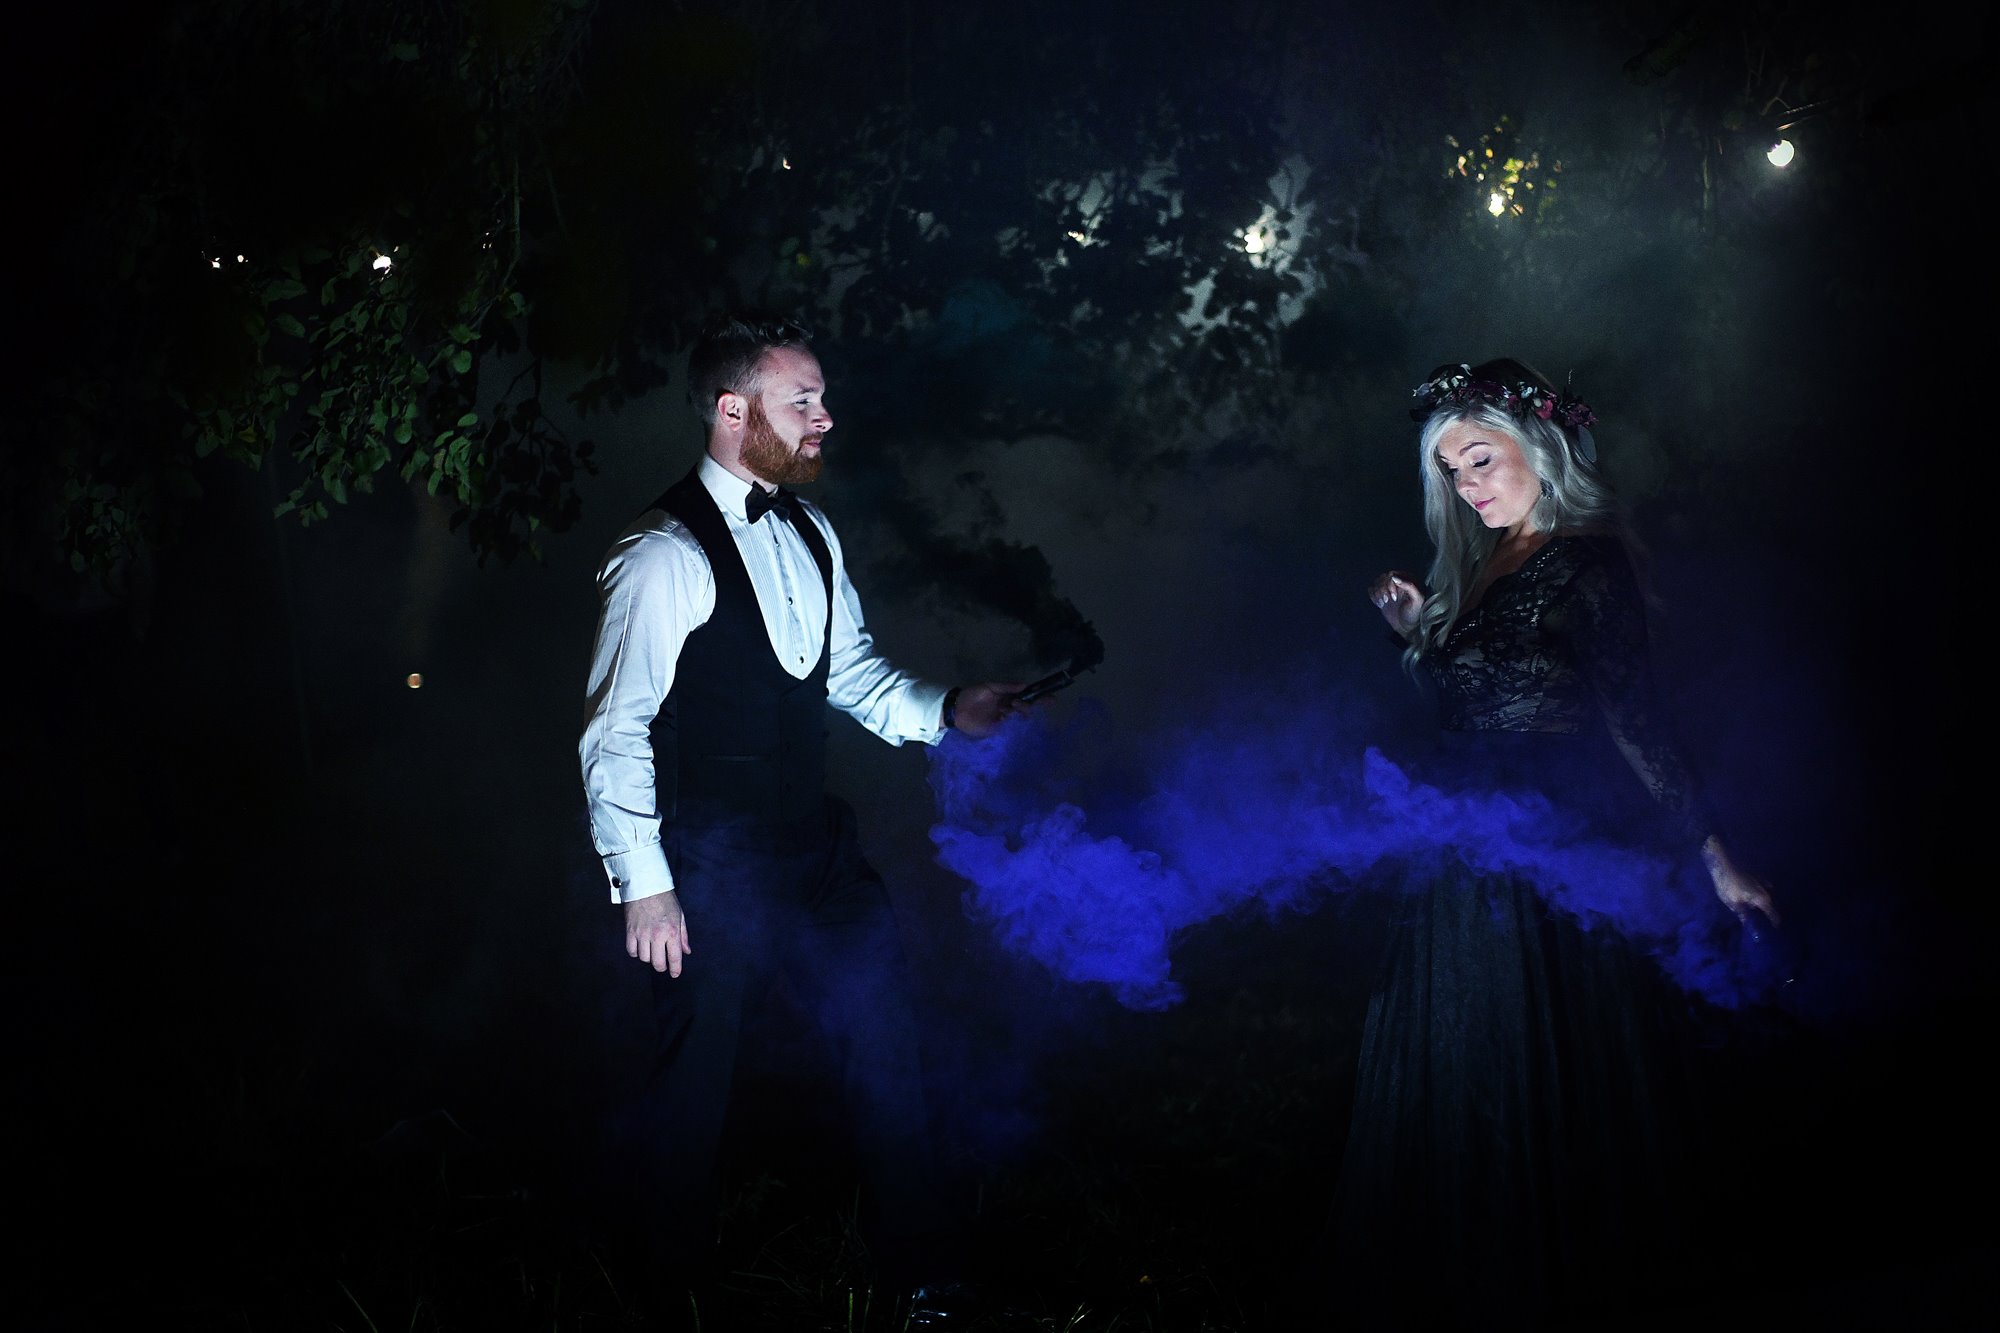 gothic couple in magical photoshoot for witchy wedding inspired by halloween and hocus pocus